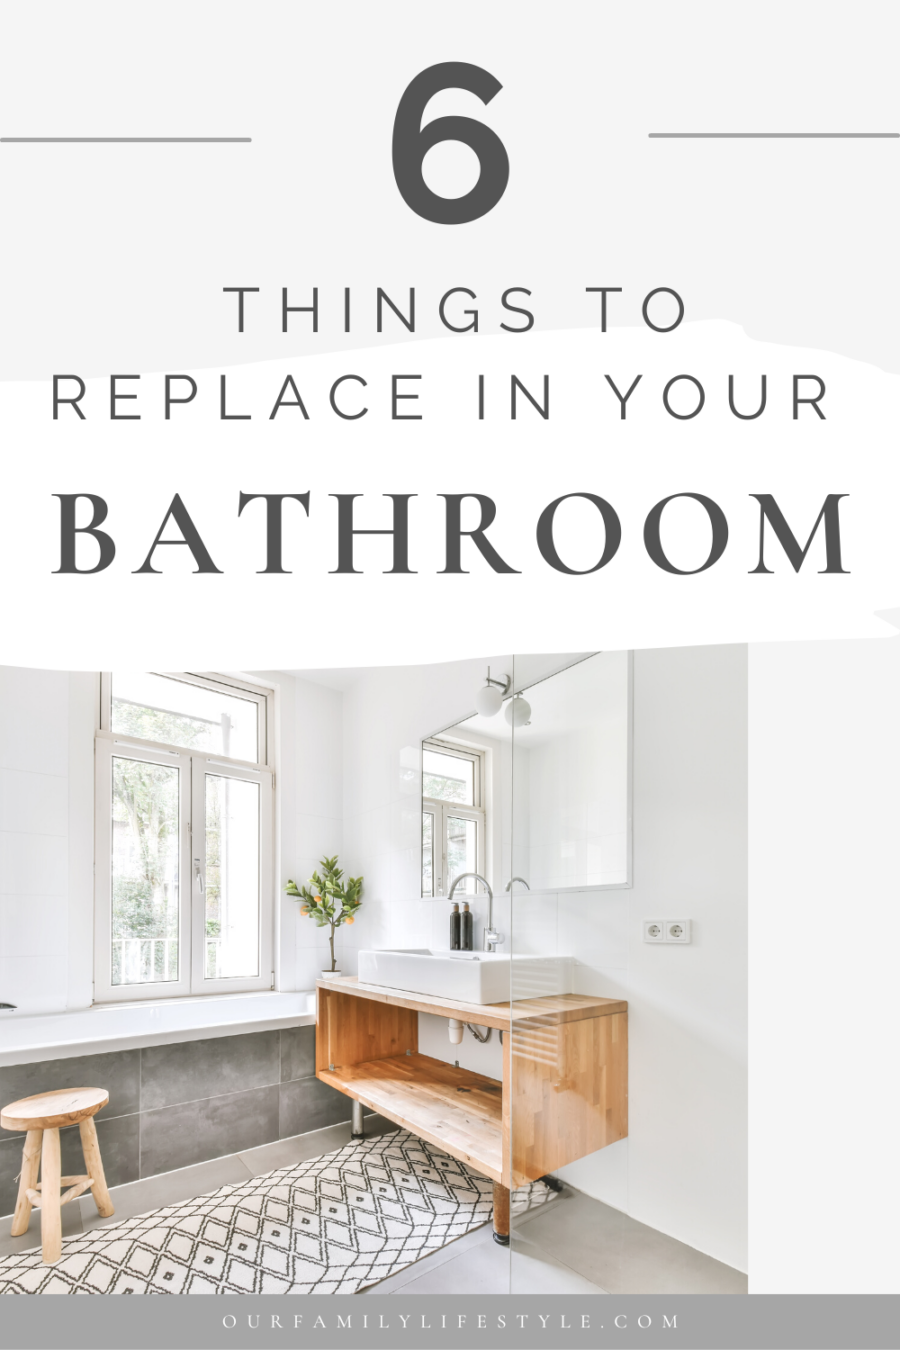 6 Things To Replace In Your Bathroom For A More Polished Look